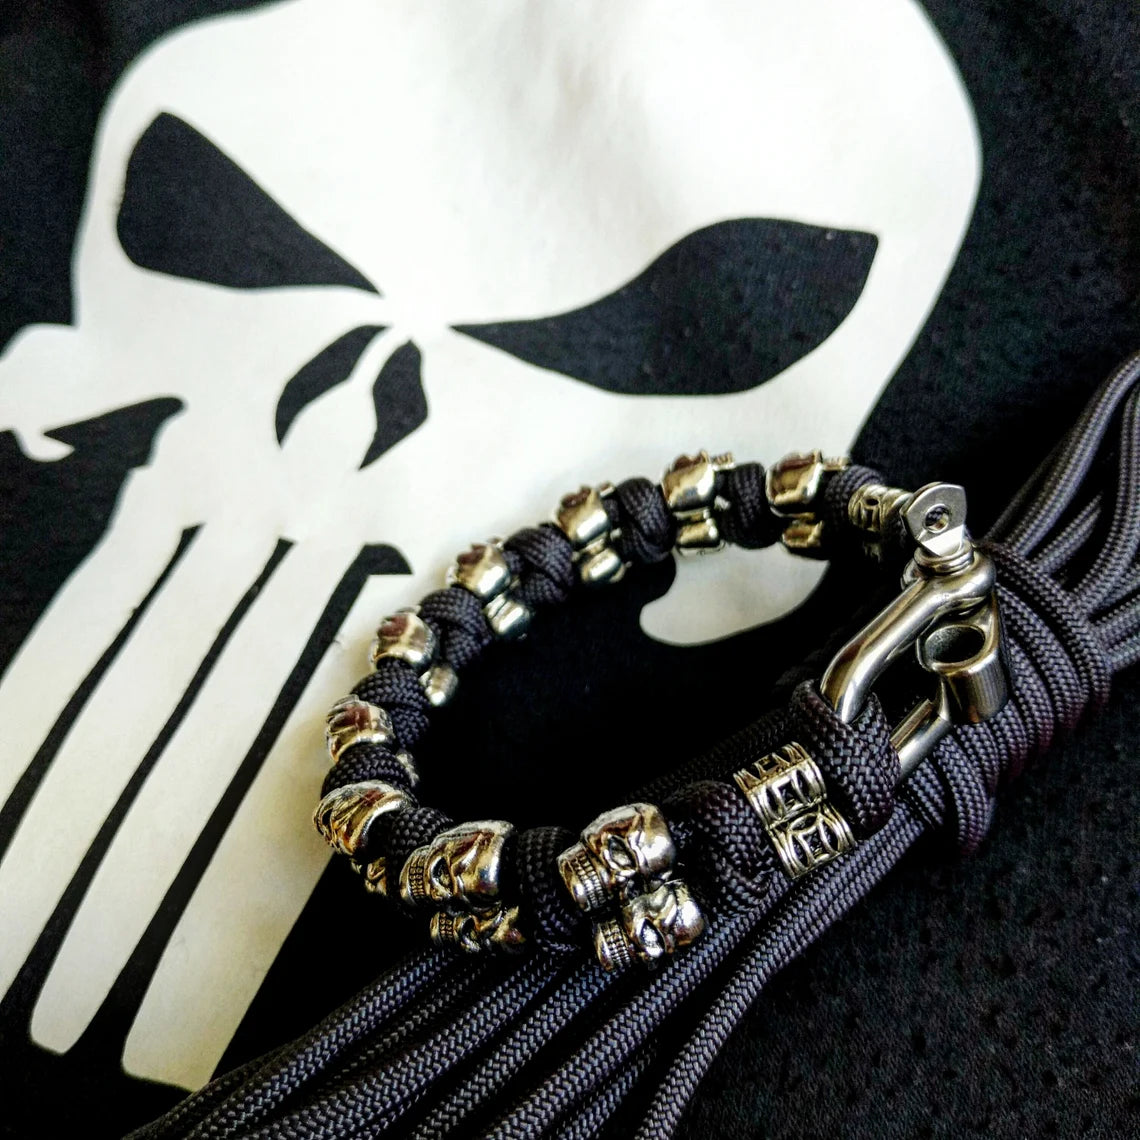 Silver skull paracord bracelet.  A great gift for men and women who prefer a brutal style and a symbol of the skull.  Celtic knots.